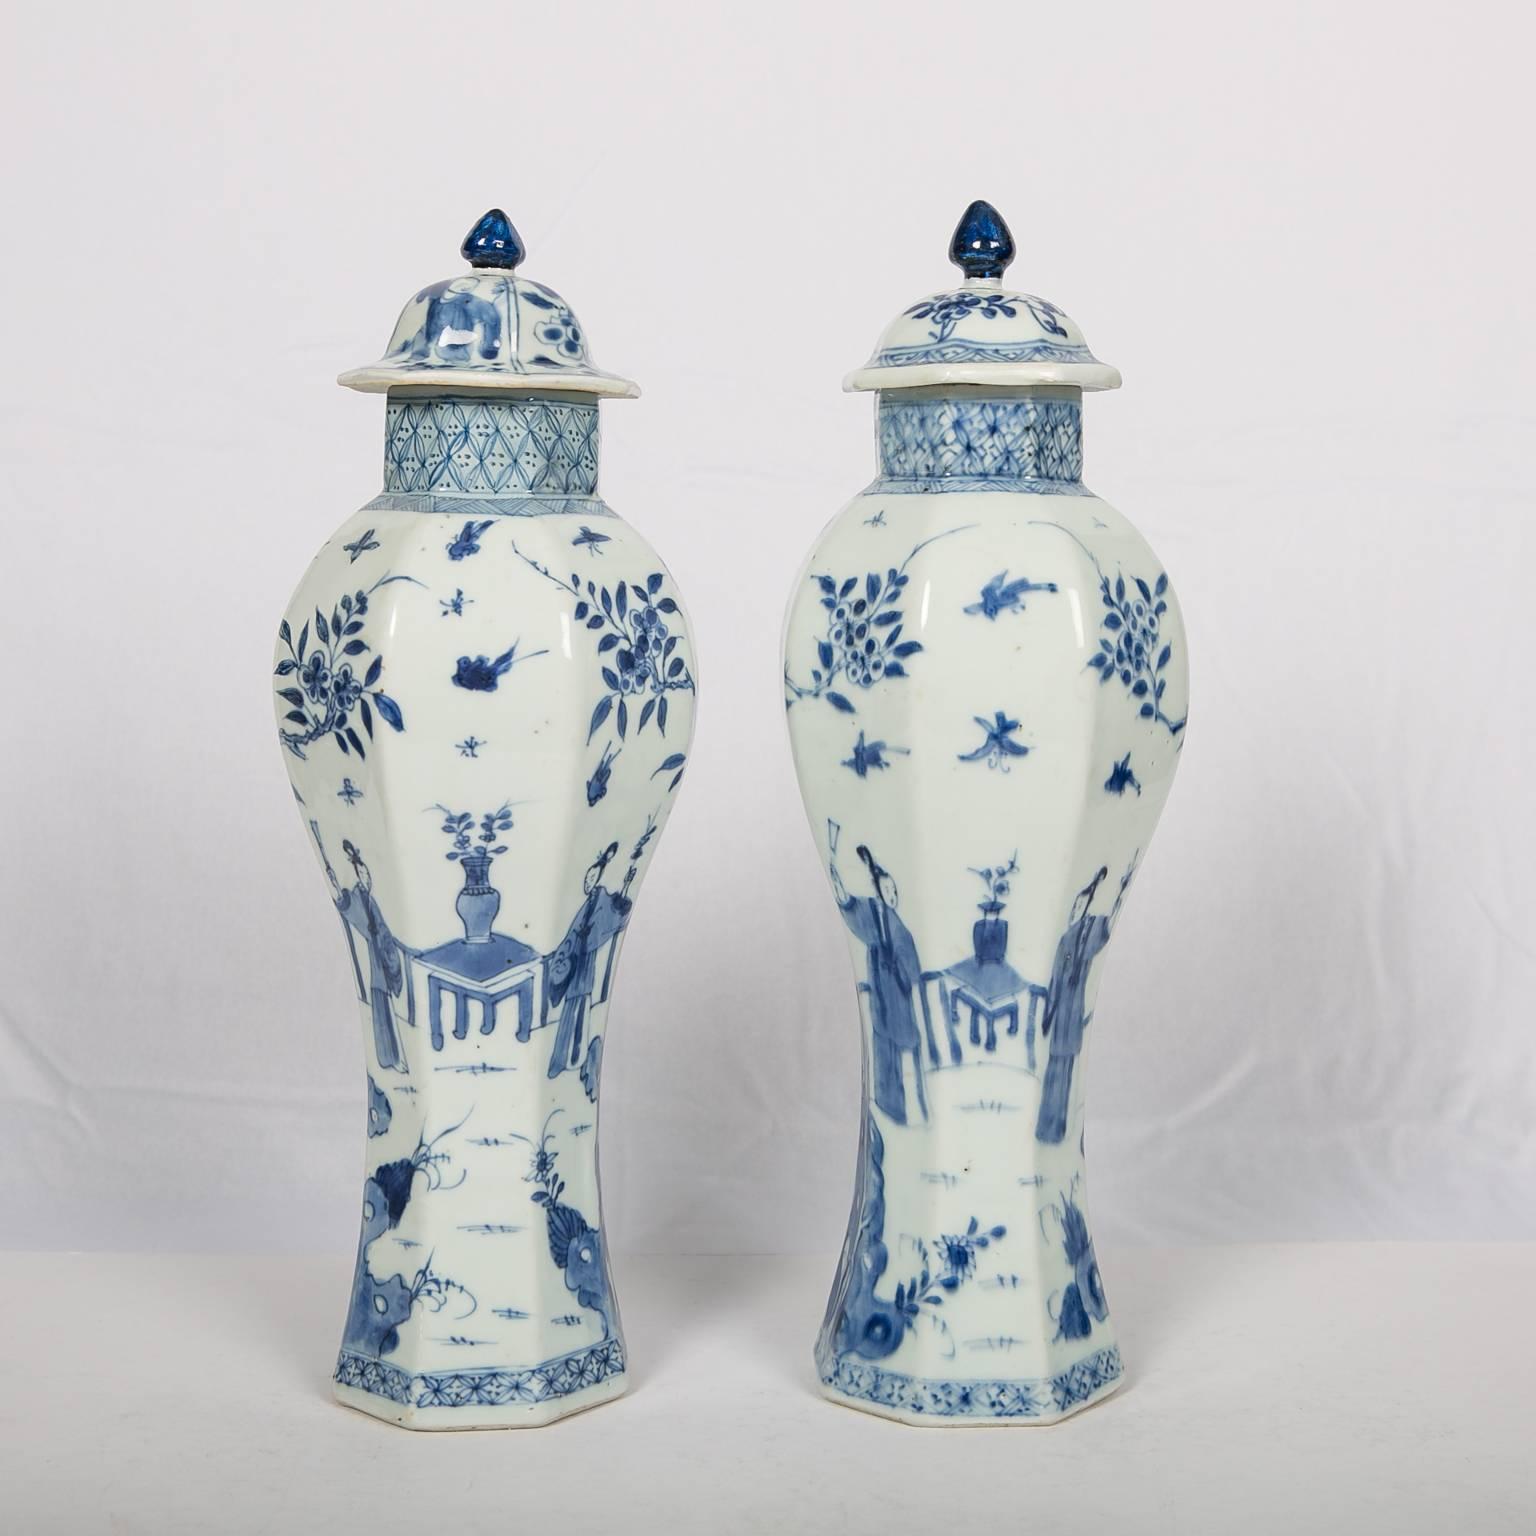 This pair of Blue and White vases painted in the Kangxi era some three hundred years ago are elegantly decorated with slim ladies enjoying their pastime in picturesque private gardens. In the foreground we see jagged Taihu rocks upon which grow